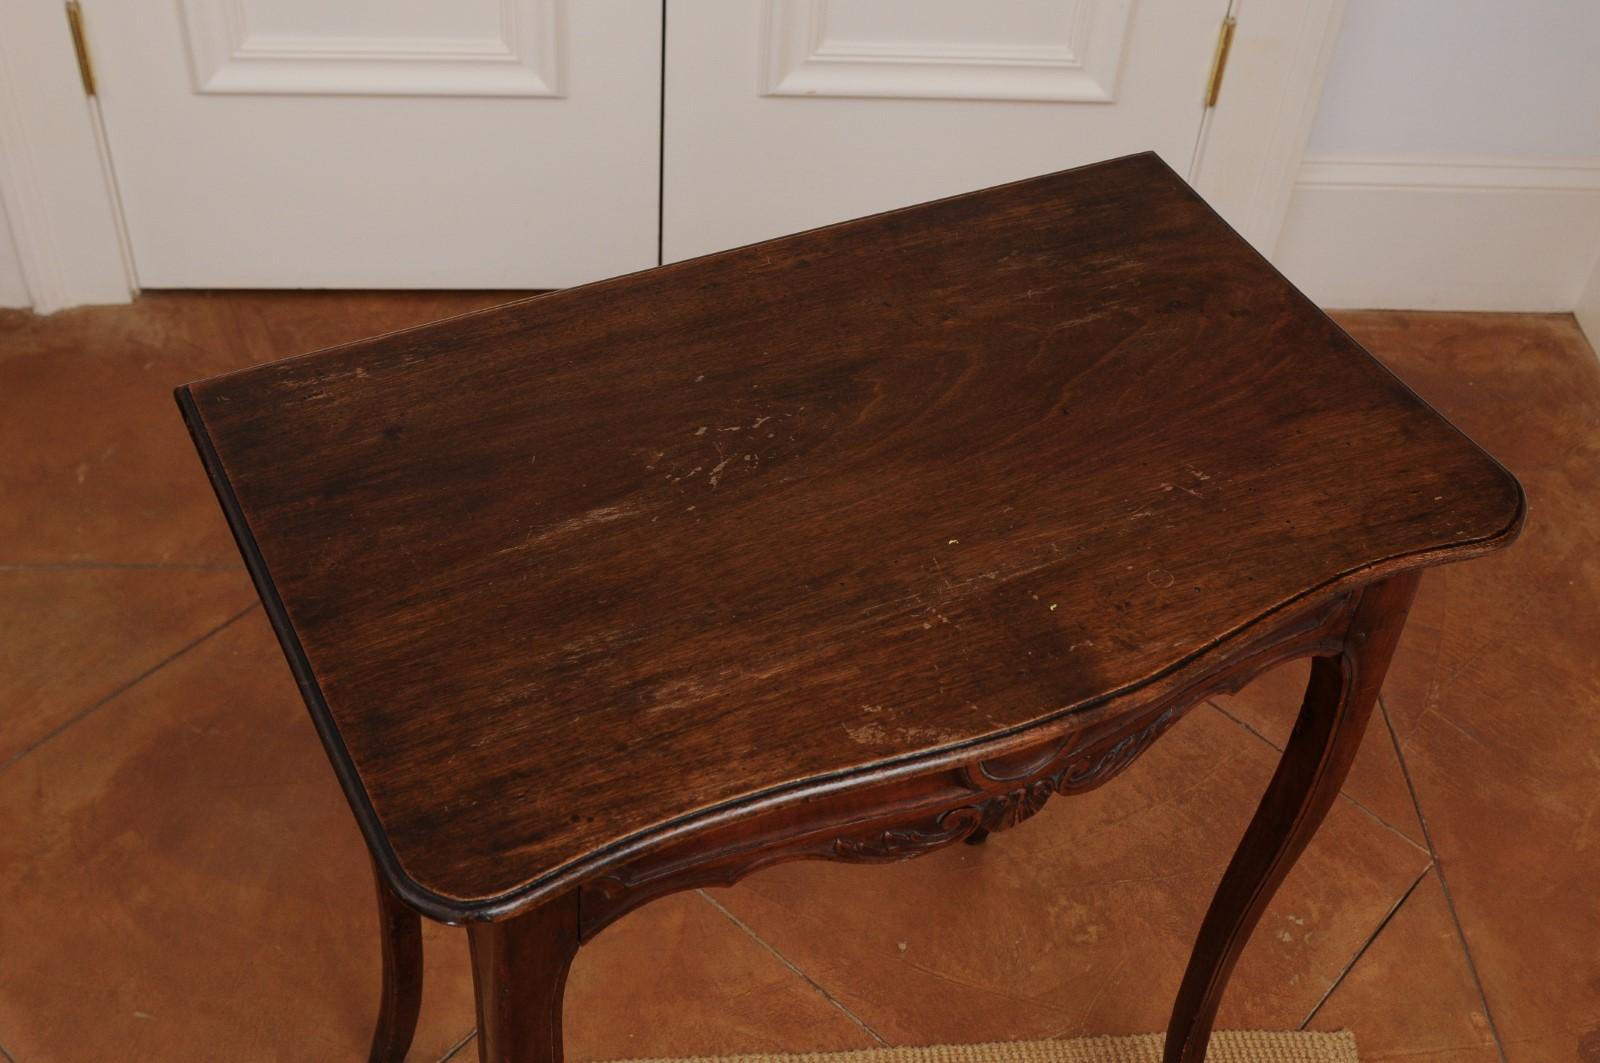 French 1790s Walnut Side Table with Side Drawer, Curving Legs and Carved Apron For Sale 1